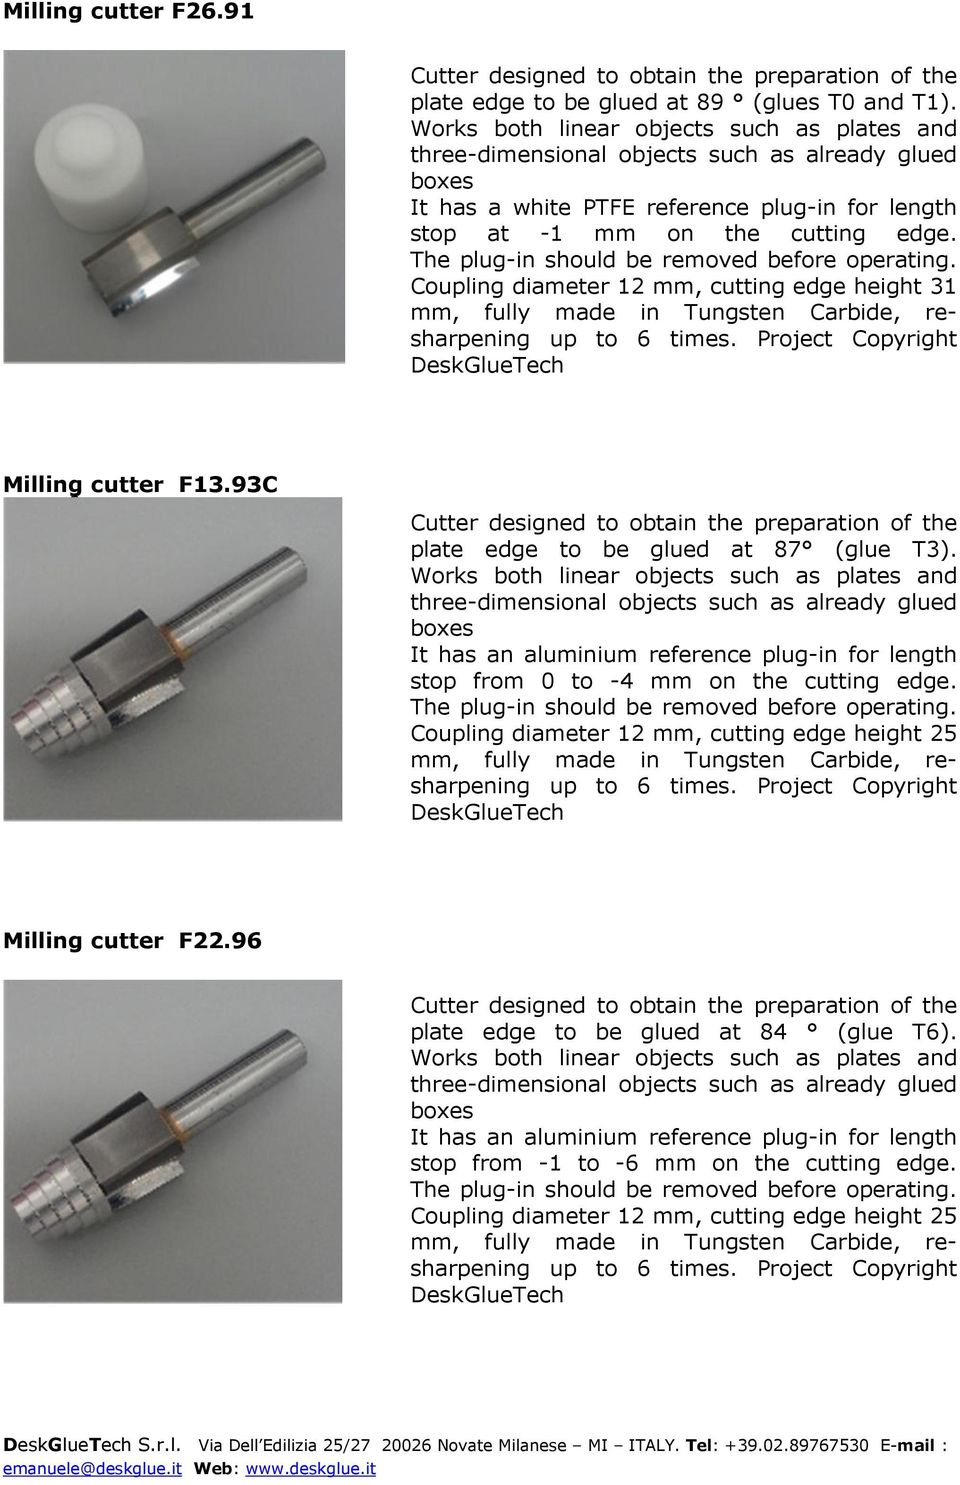 The plug-in should be removed before operating. Coupling diameter 12 mm, cutting edge height 31 mm, fully made in Tungsten Carbide, resharpening up to 6 times.